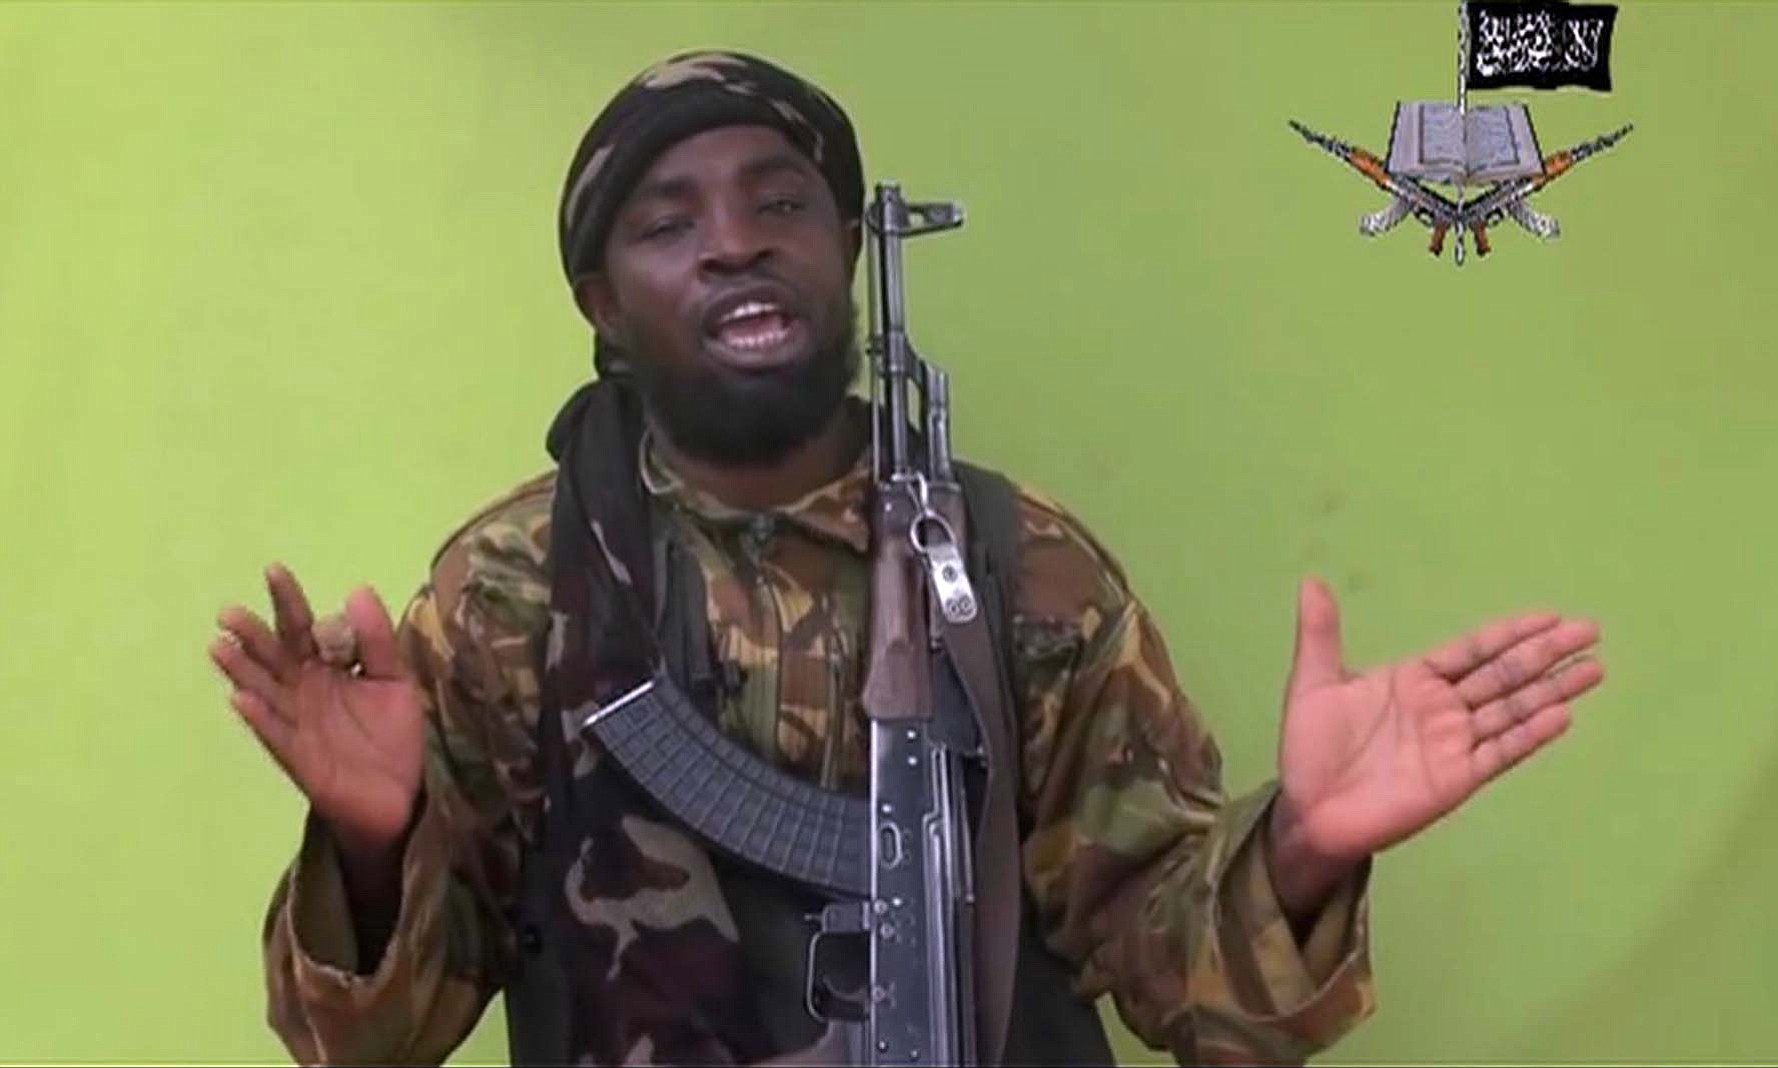 Abubakar Shekau speaks in front of a camera in May. The leader of Nigeria's Islamic extremist group Boko Haram denied agreeing to any cease-fire with the government and said more than 200 kidnapped schoolgirls all have converted to Islam and been married off.